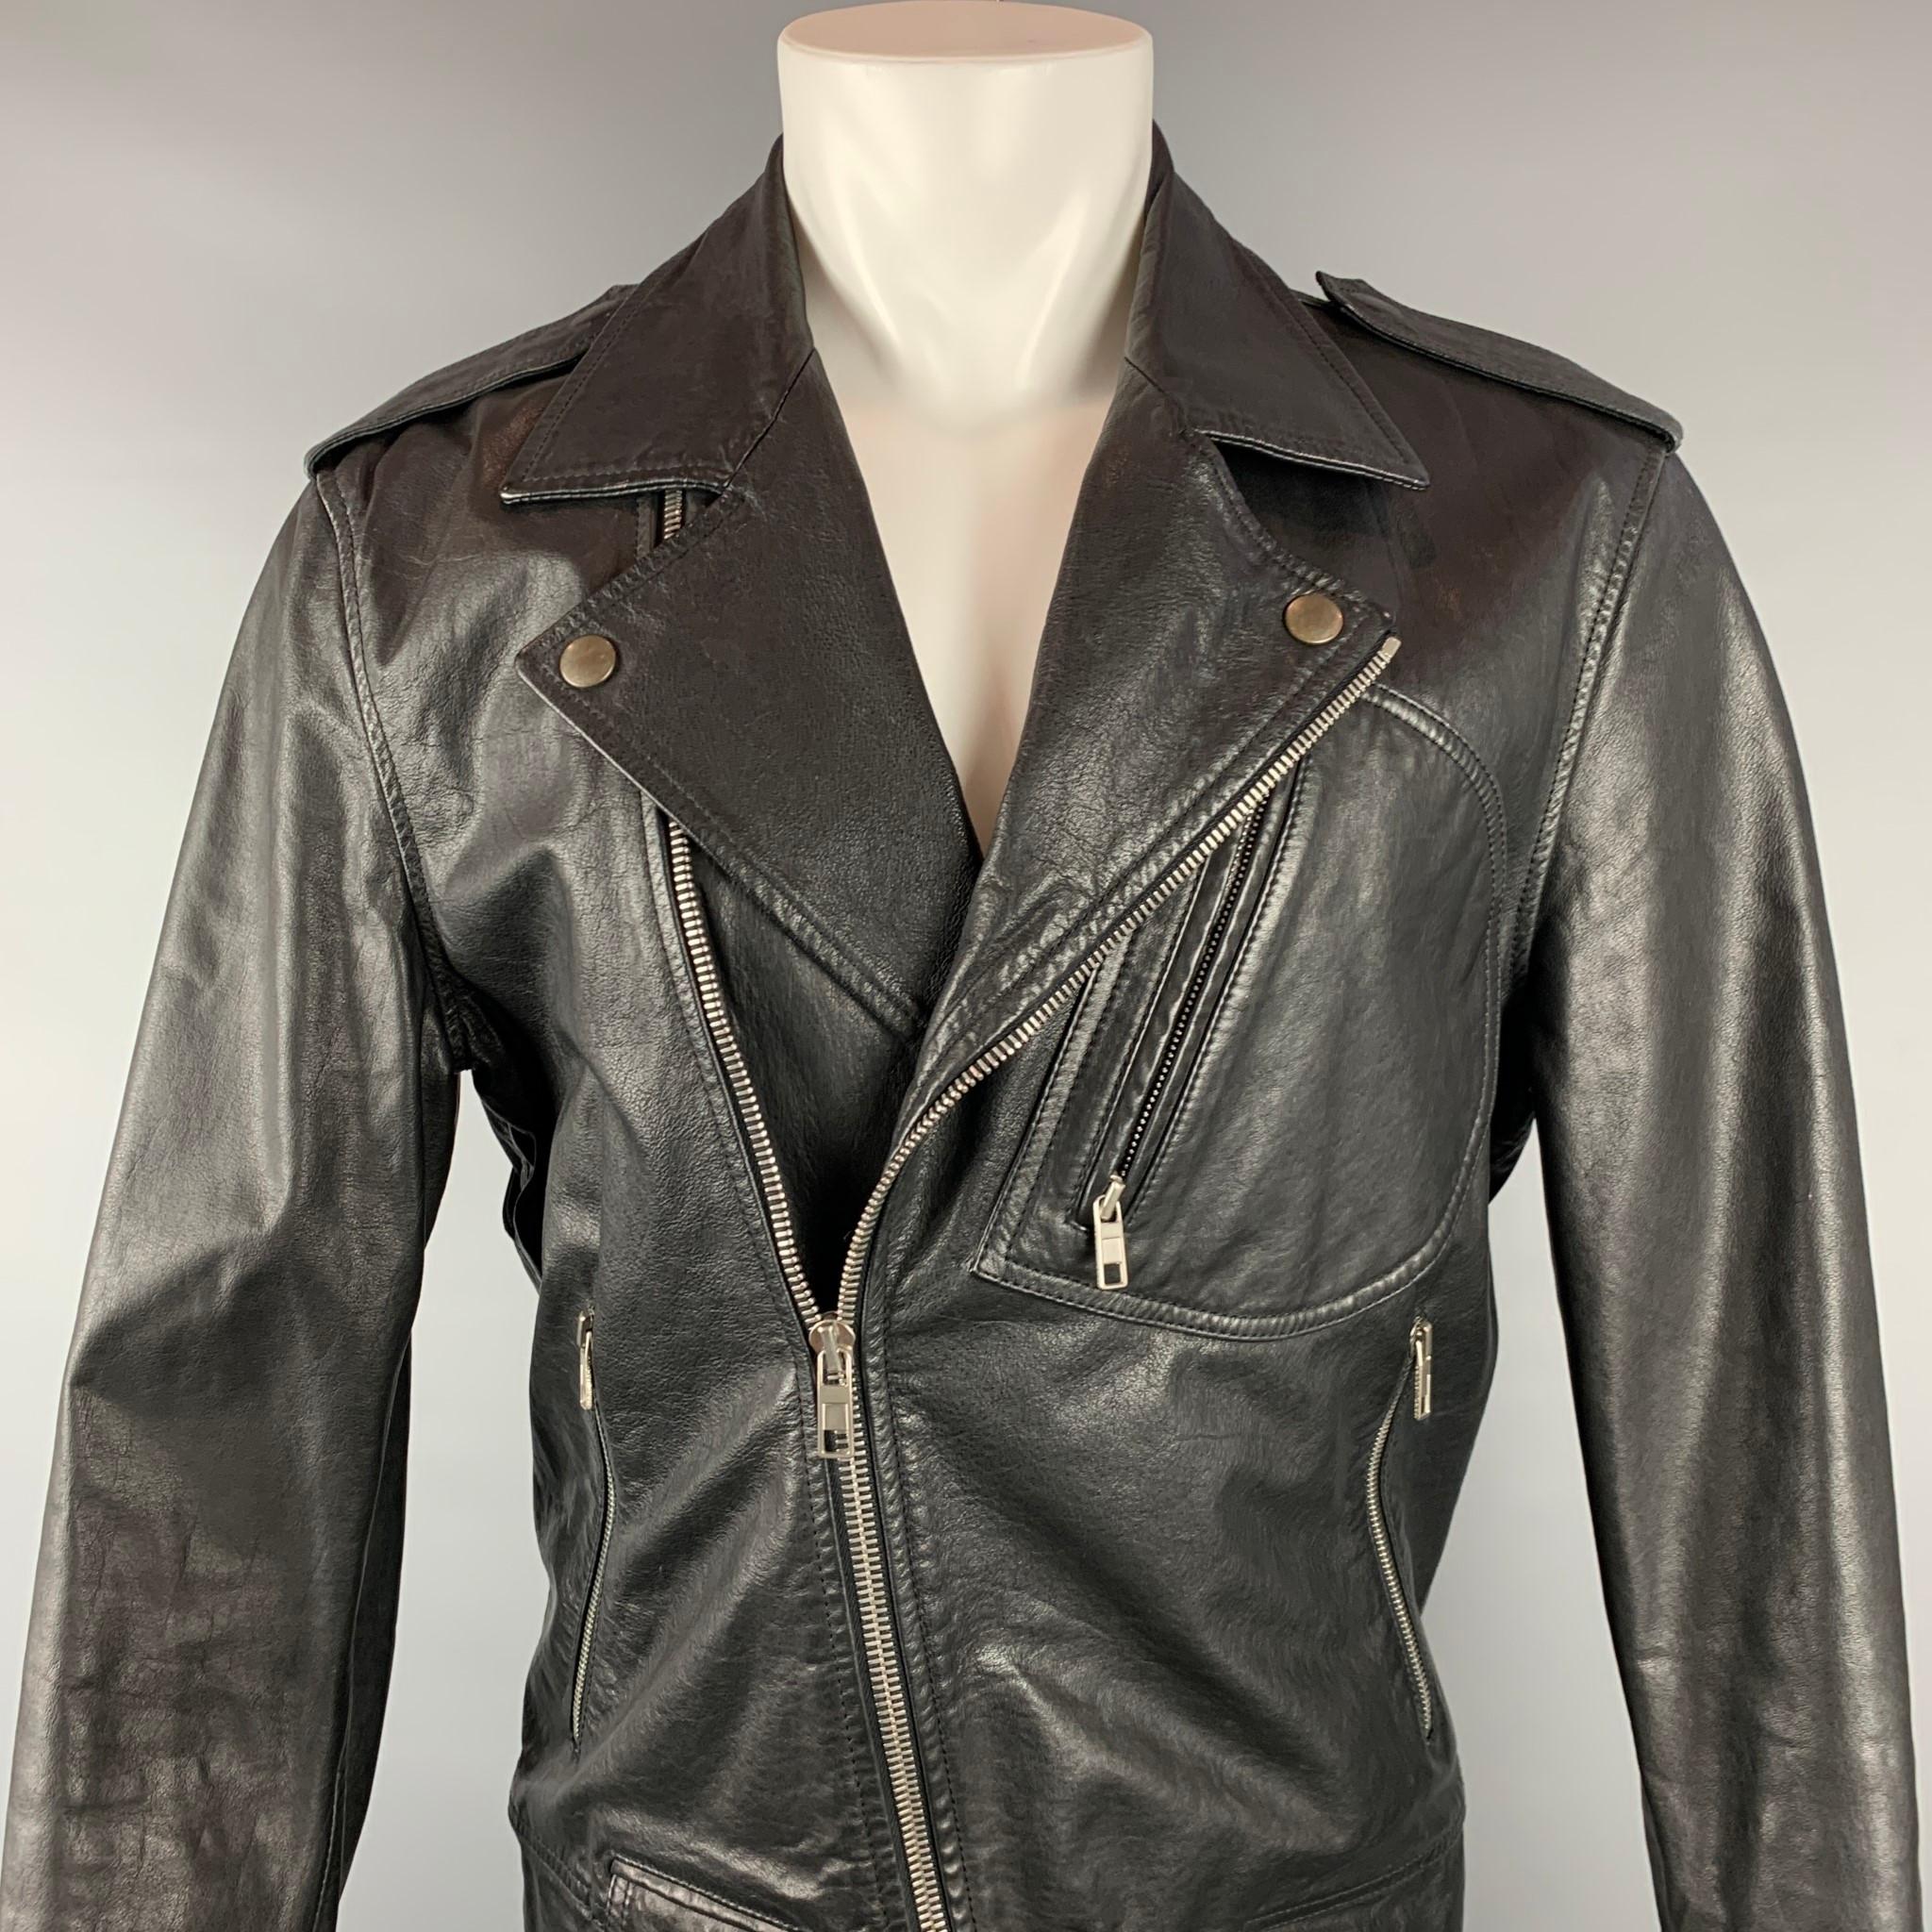 MARC JACOBS jacket comes in a black leather with a full liner featuring a biker style, front zipper pockets, epaulettes, and a zip up closure. Made in Italy.

Very Good Pre-Owned Condition.
Marked: IT 50

Measurements:

Shoulder: 19 in.
Chest: 40